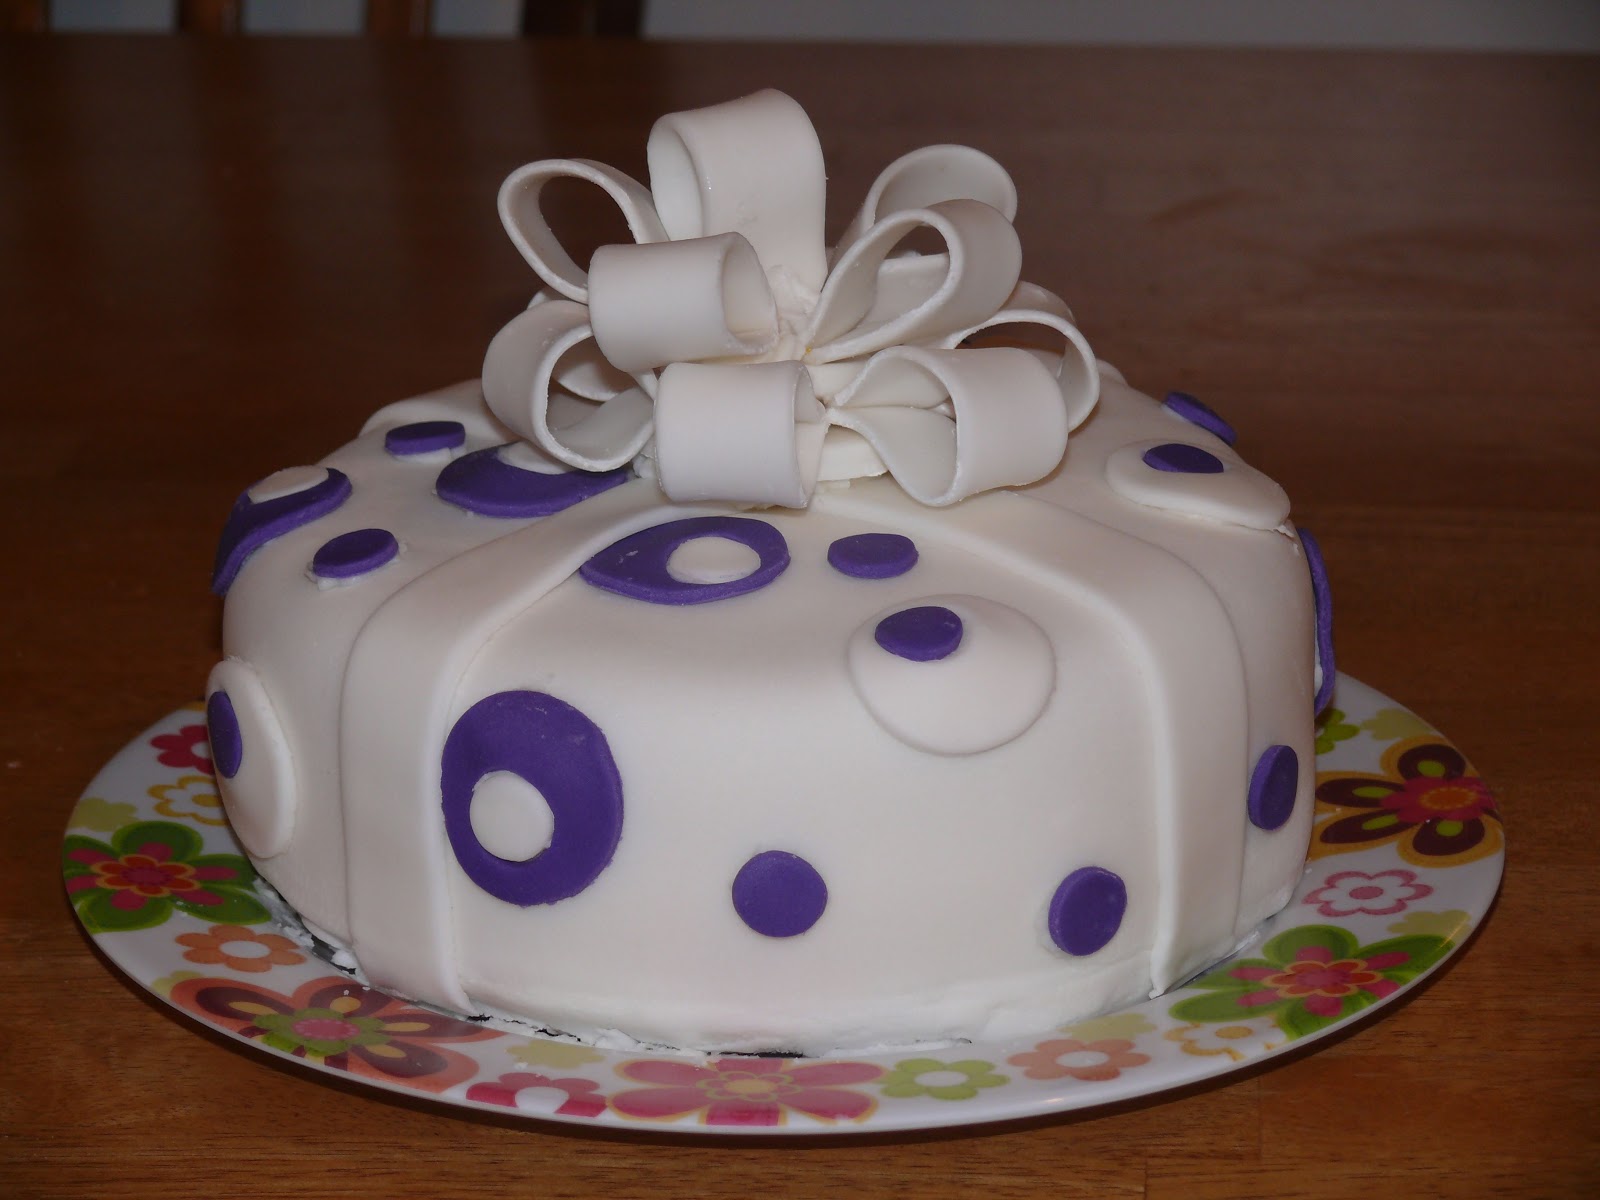 Busy Mama: GET OUT: WILTON CAKE DECORATING COURSE 3